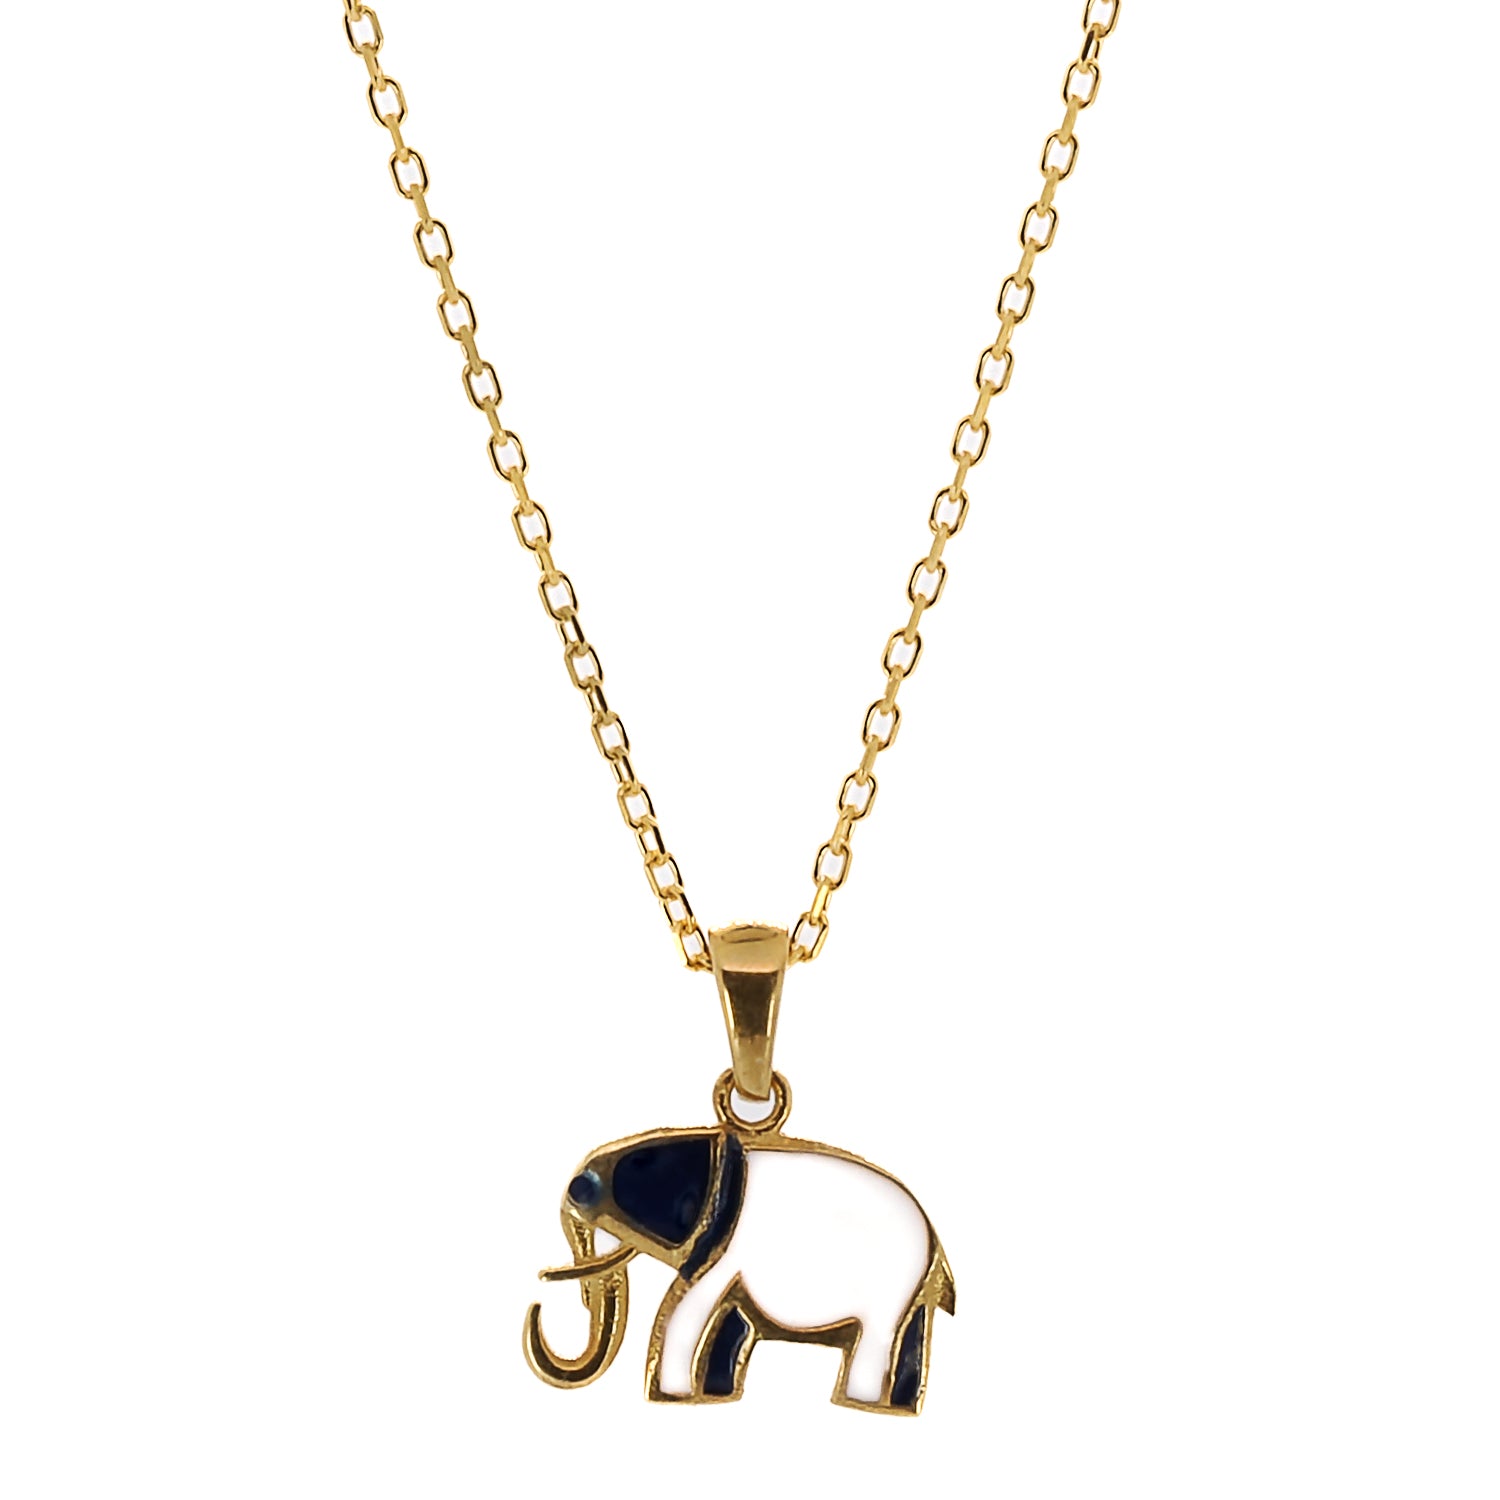 Gold Blue And White Elephant Necklace showcasing a lucky elephant pendant intricately designed with sterling silver on 18K gold plated and adorned with white and blue enamel.